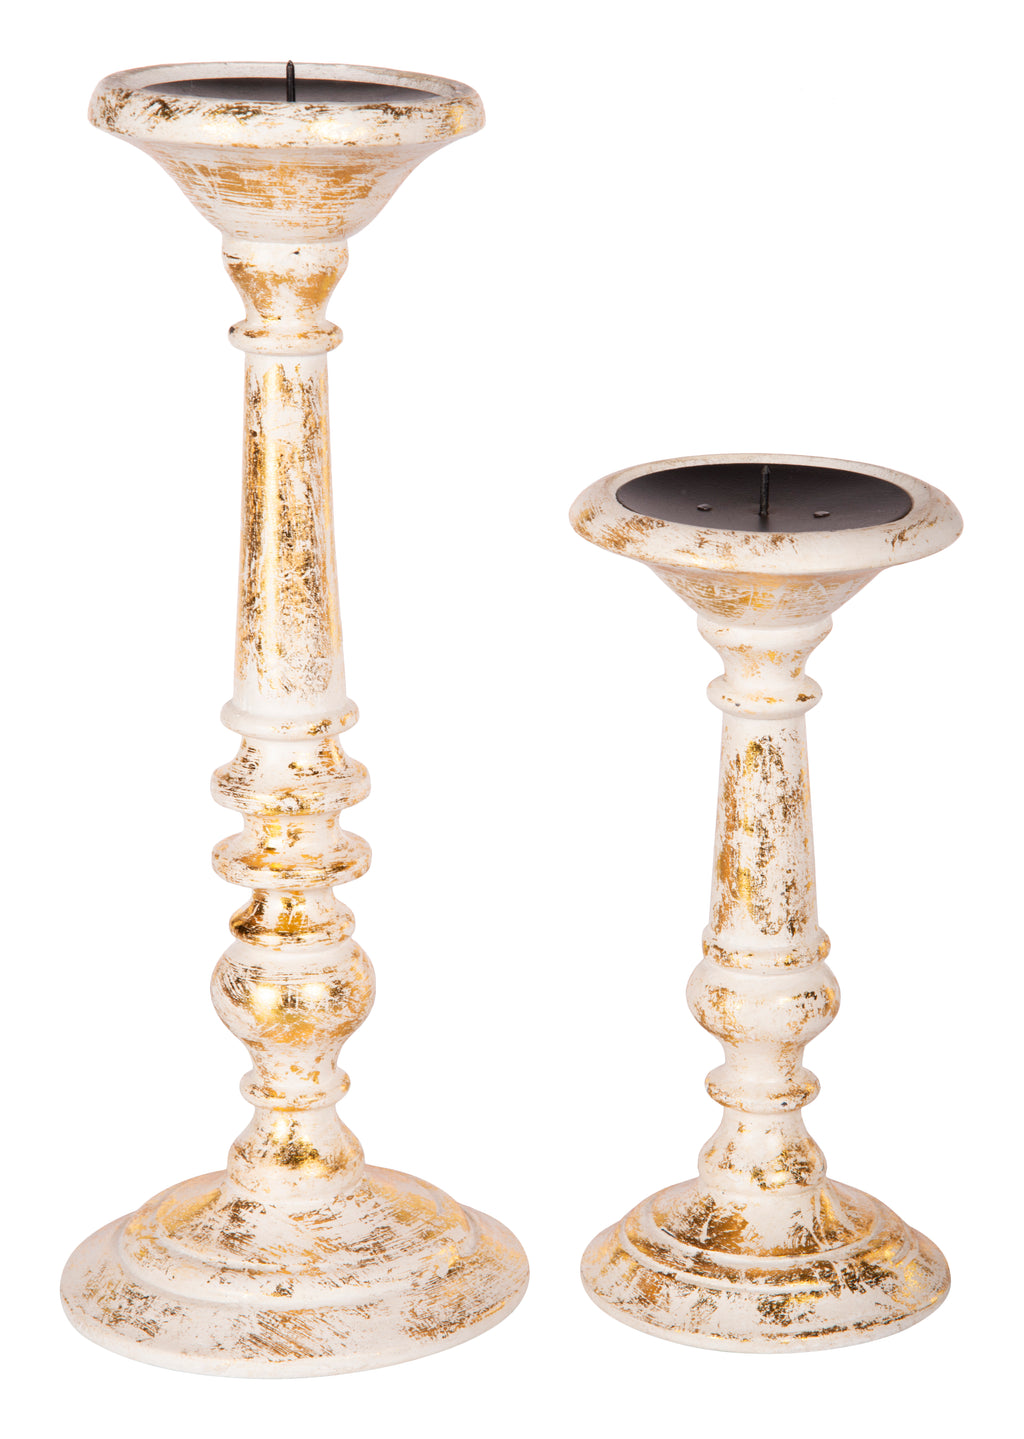 Anything & Everything Handmade Wooden Candle Holder Stand for Home Decor on Christmas and Diwali (Set of 2) - Gold & White